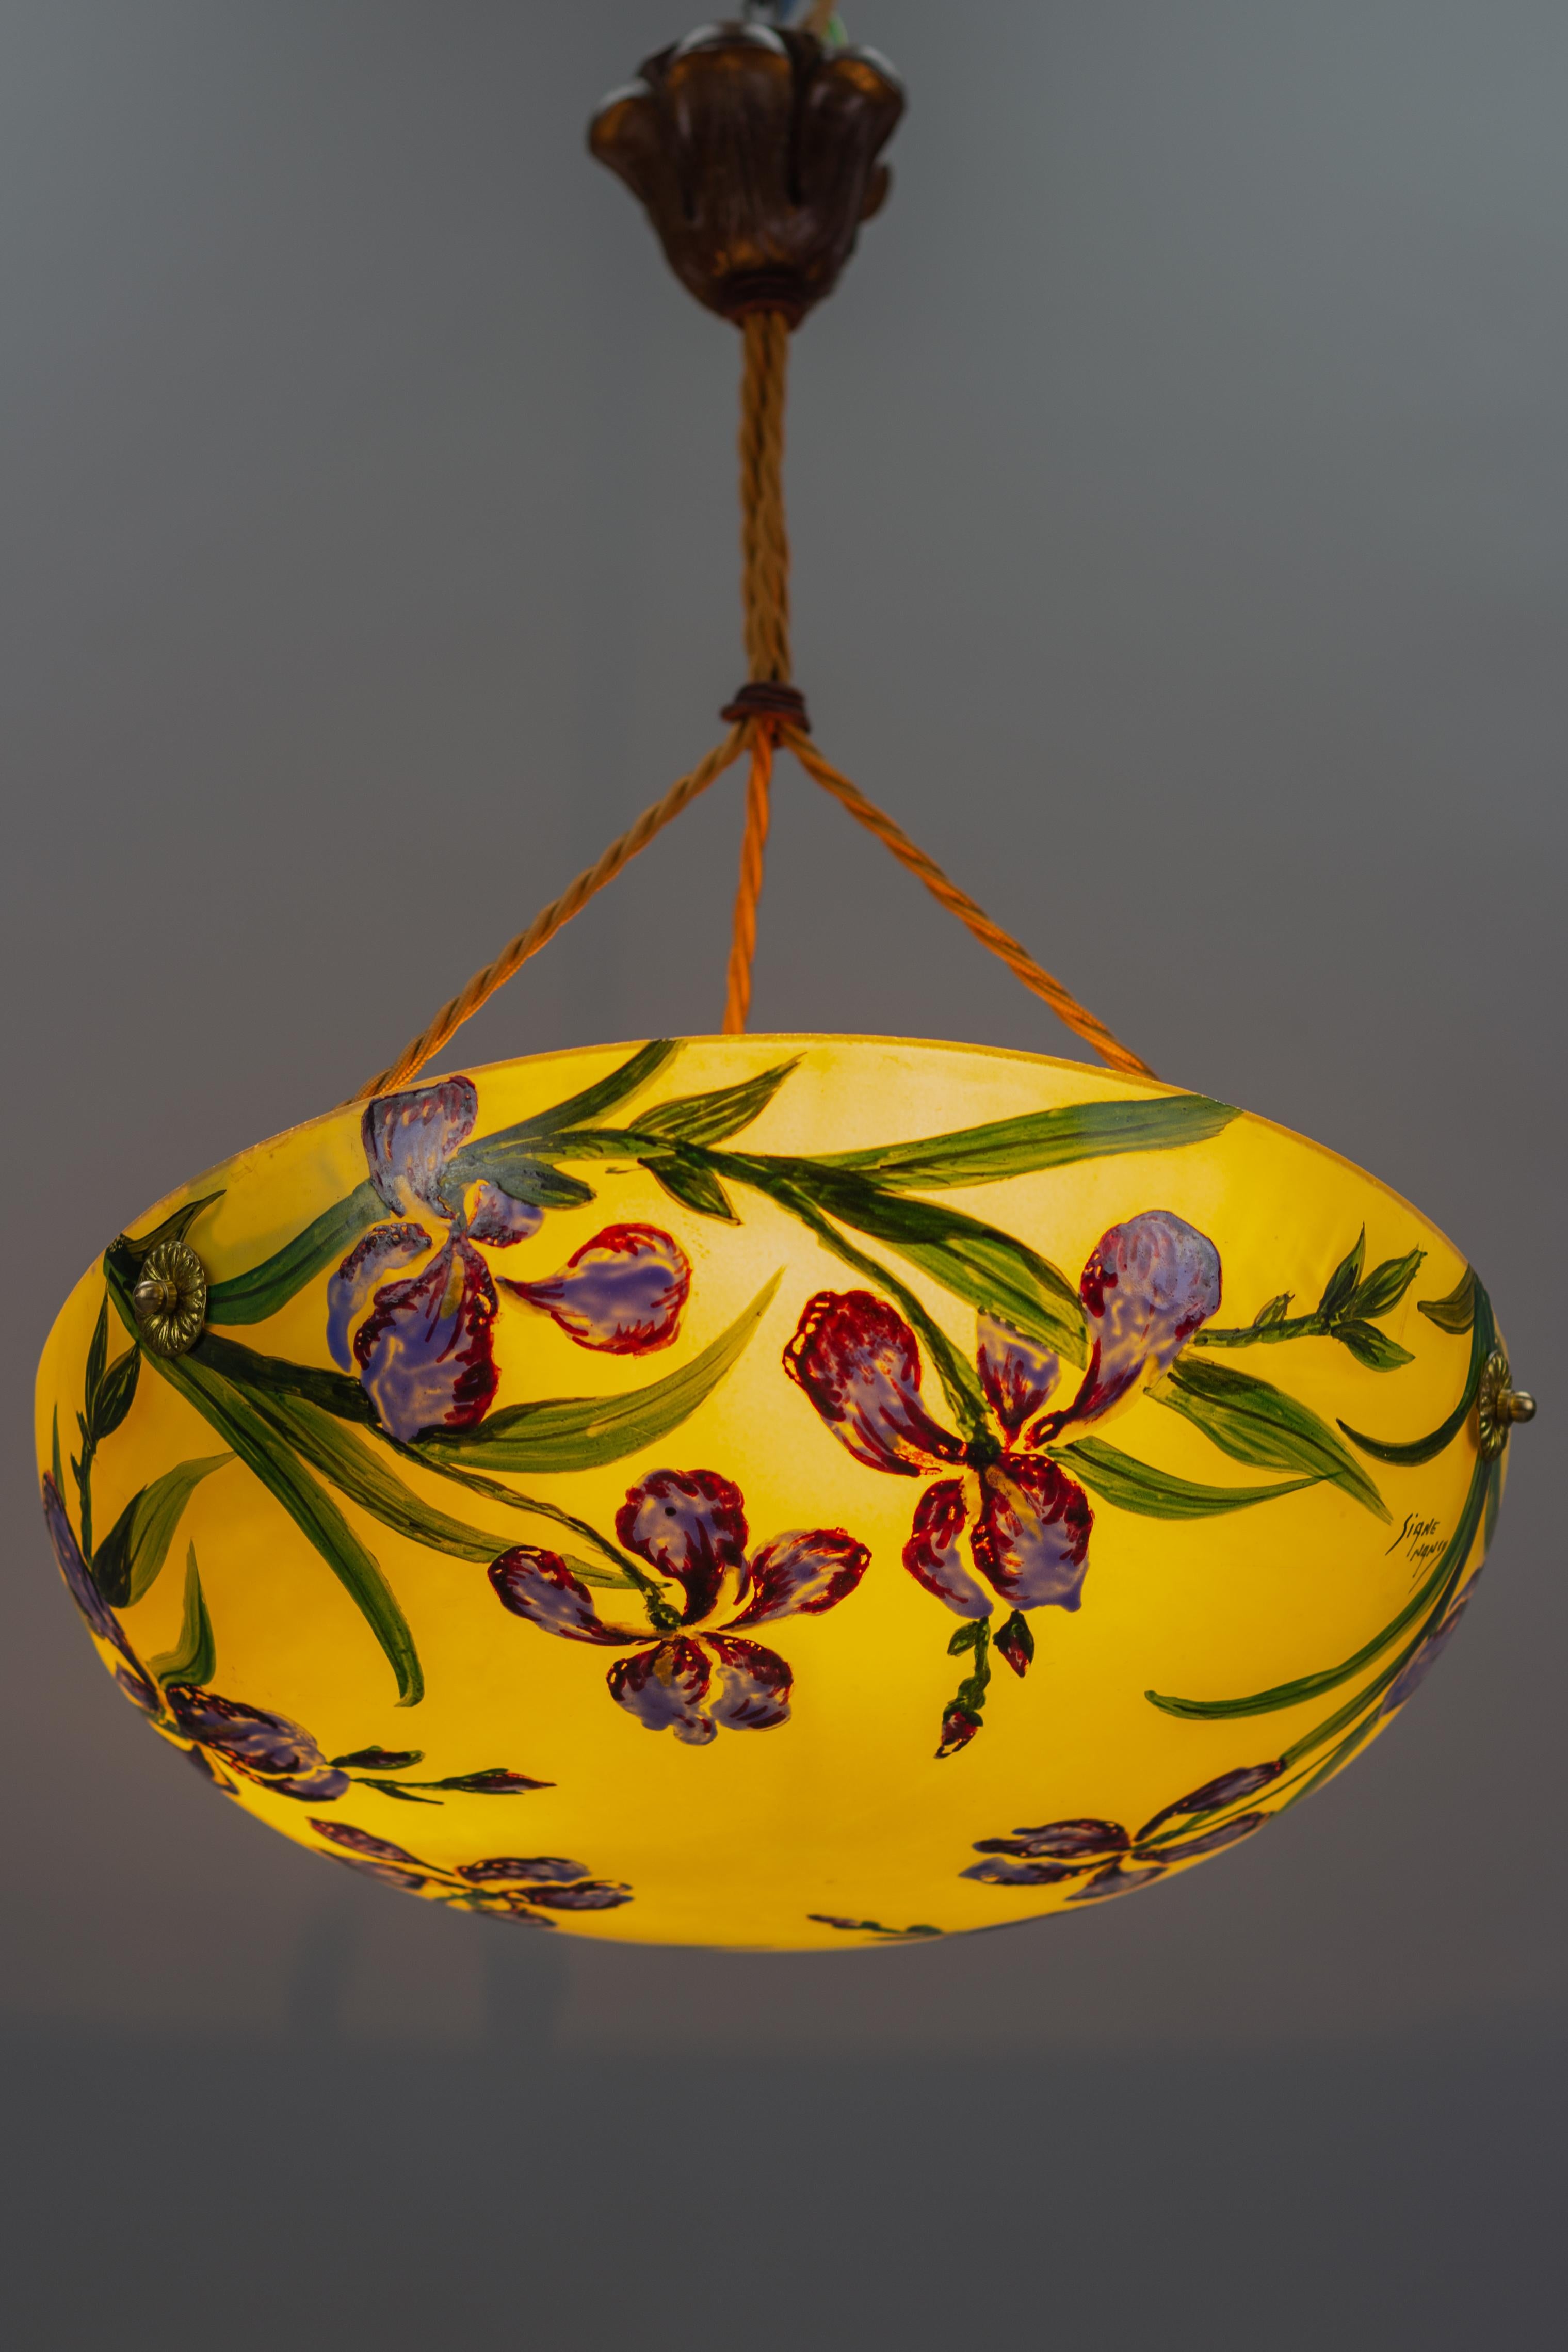 This beautiful French Art Nouveau style pendant ceiling light features a yellow glass shade with hand-painted blue iris flowers, signed 